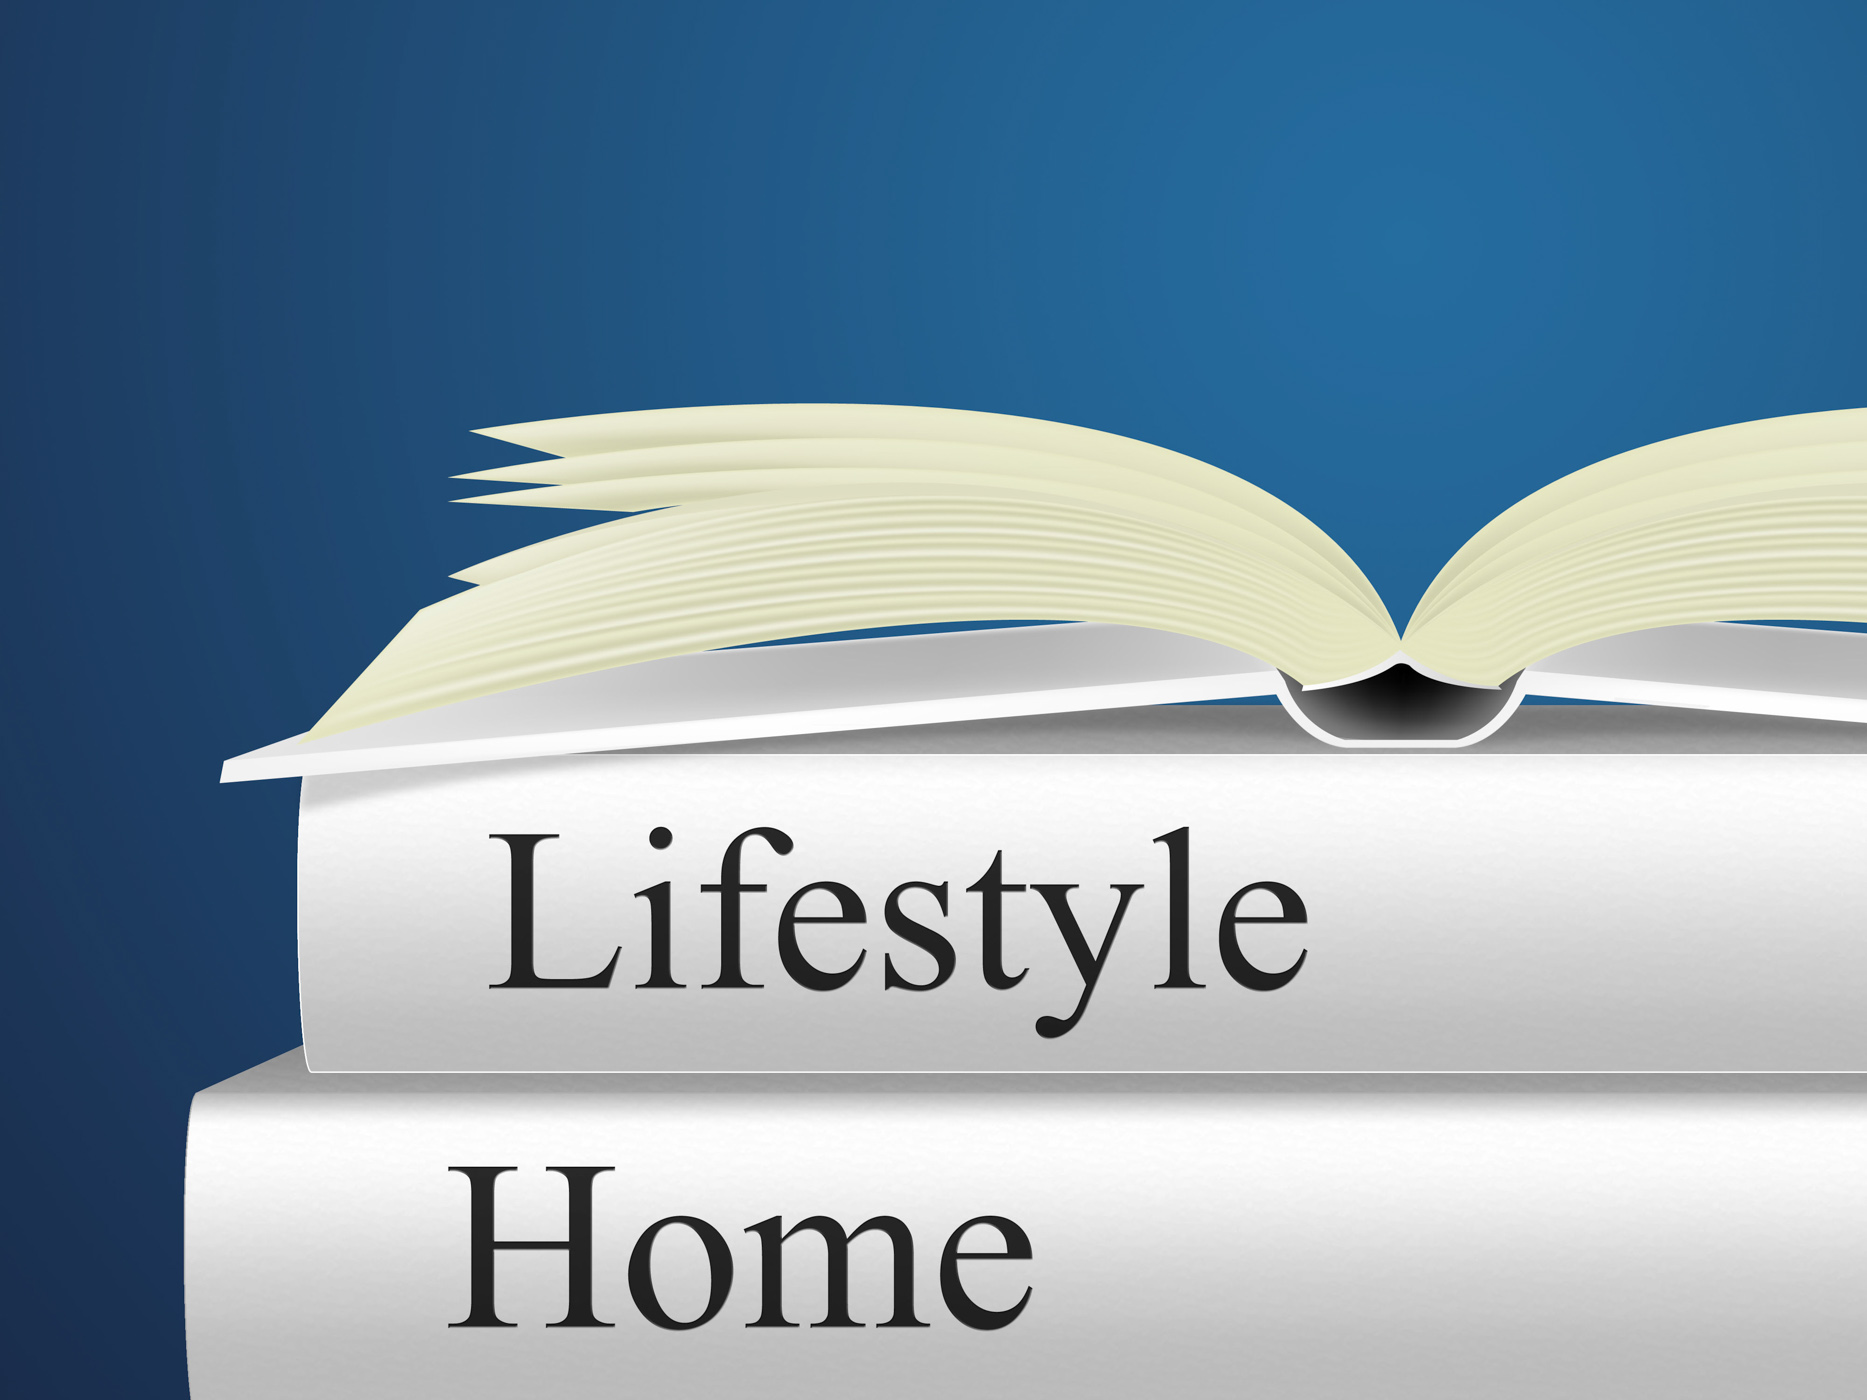 Lifestyle home indicates houses apartment and household photo